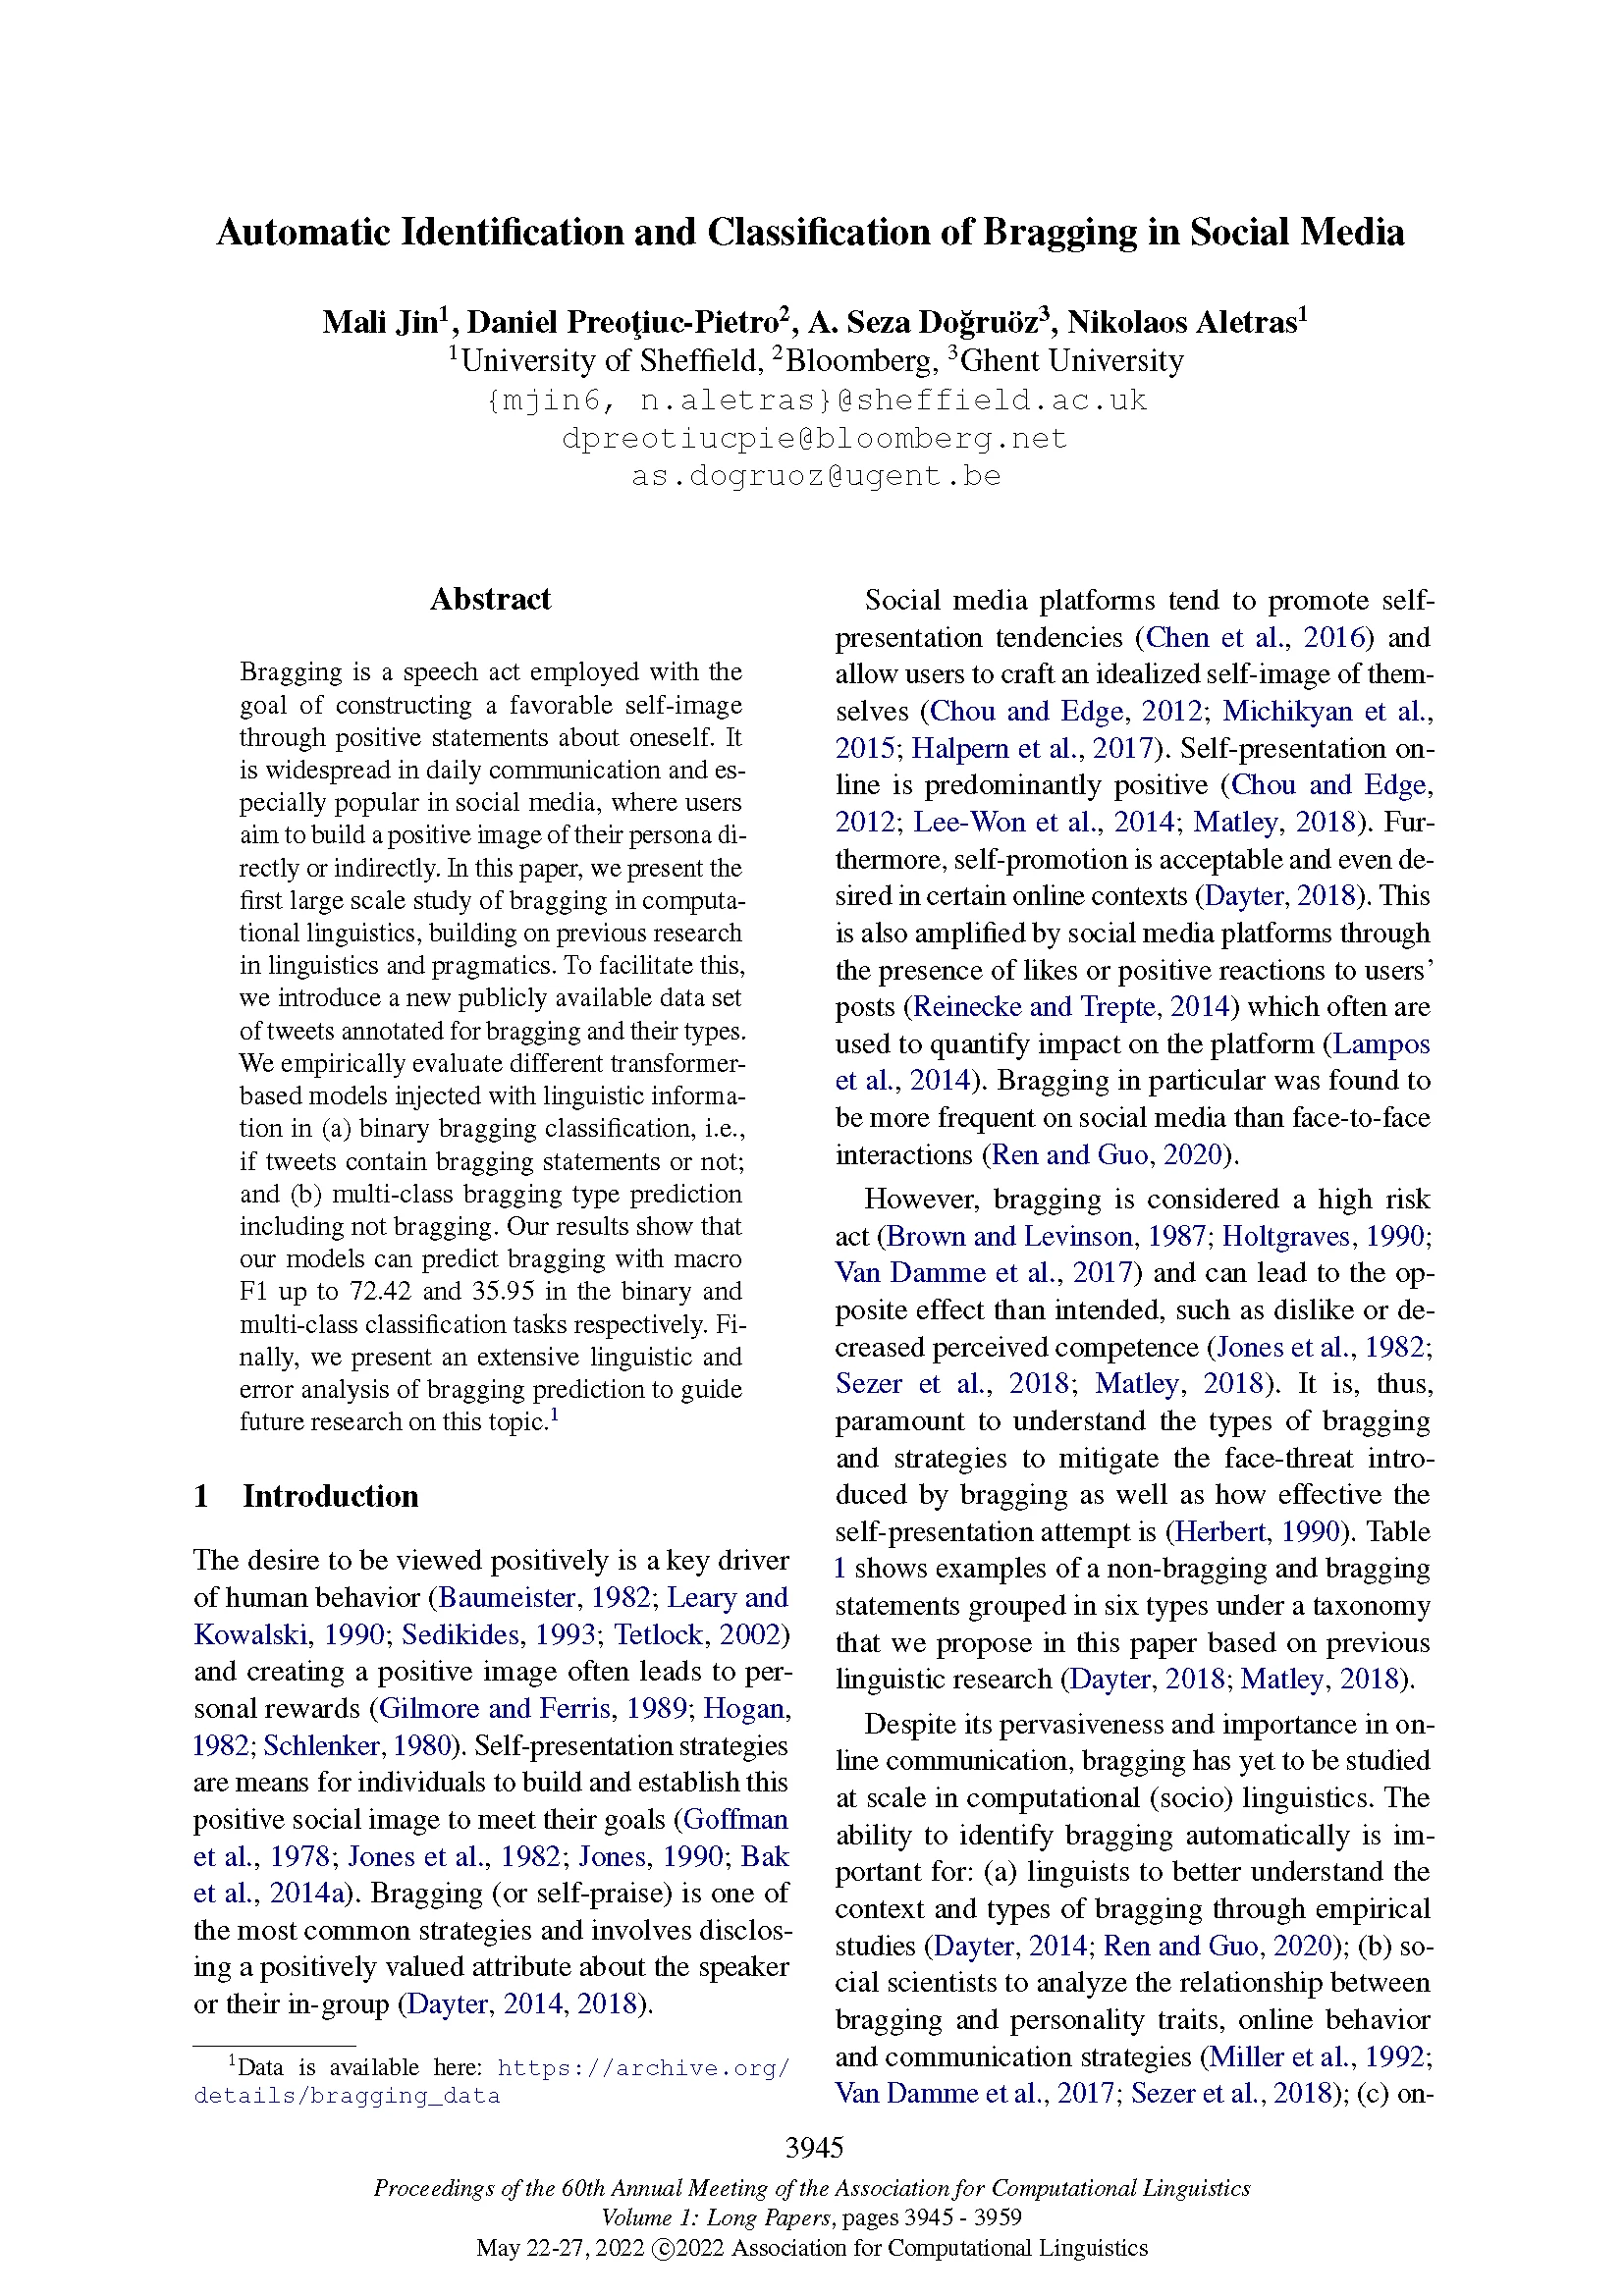 Front page of paper published at ACL 2022 titled "Automatic Identification and Classification of Bragging in Social Media."